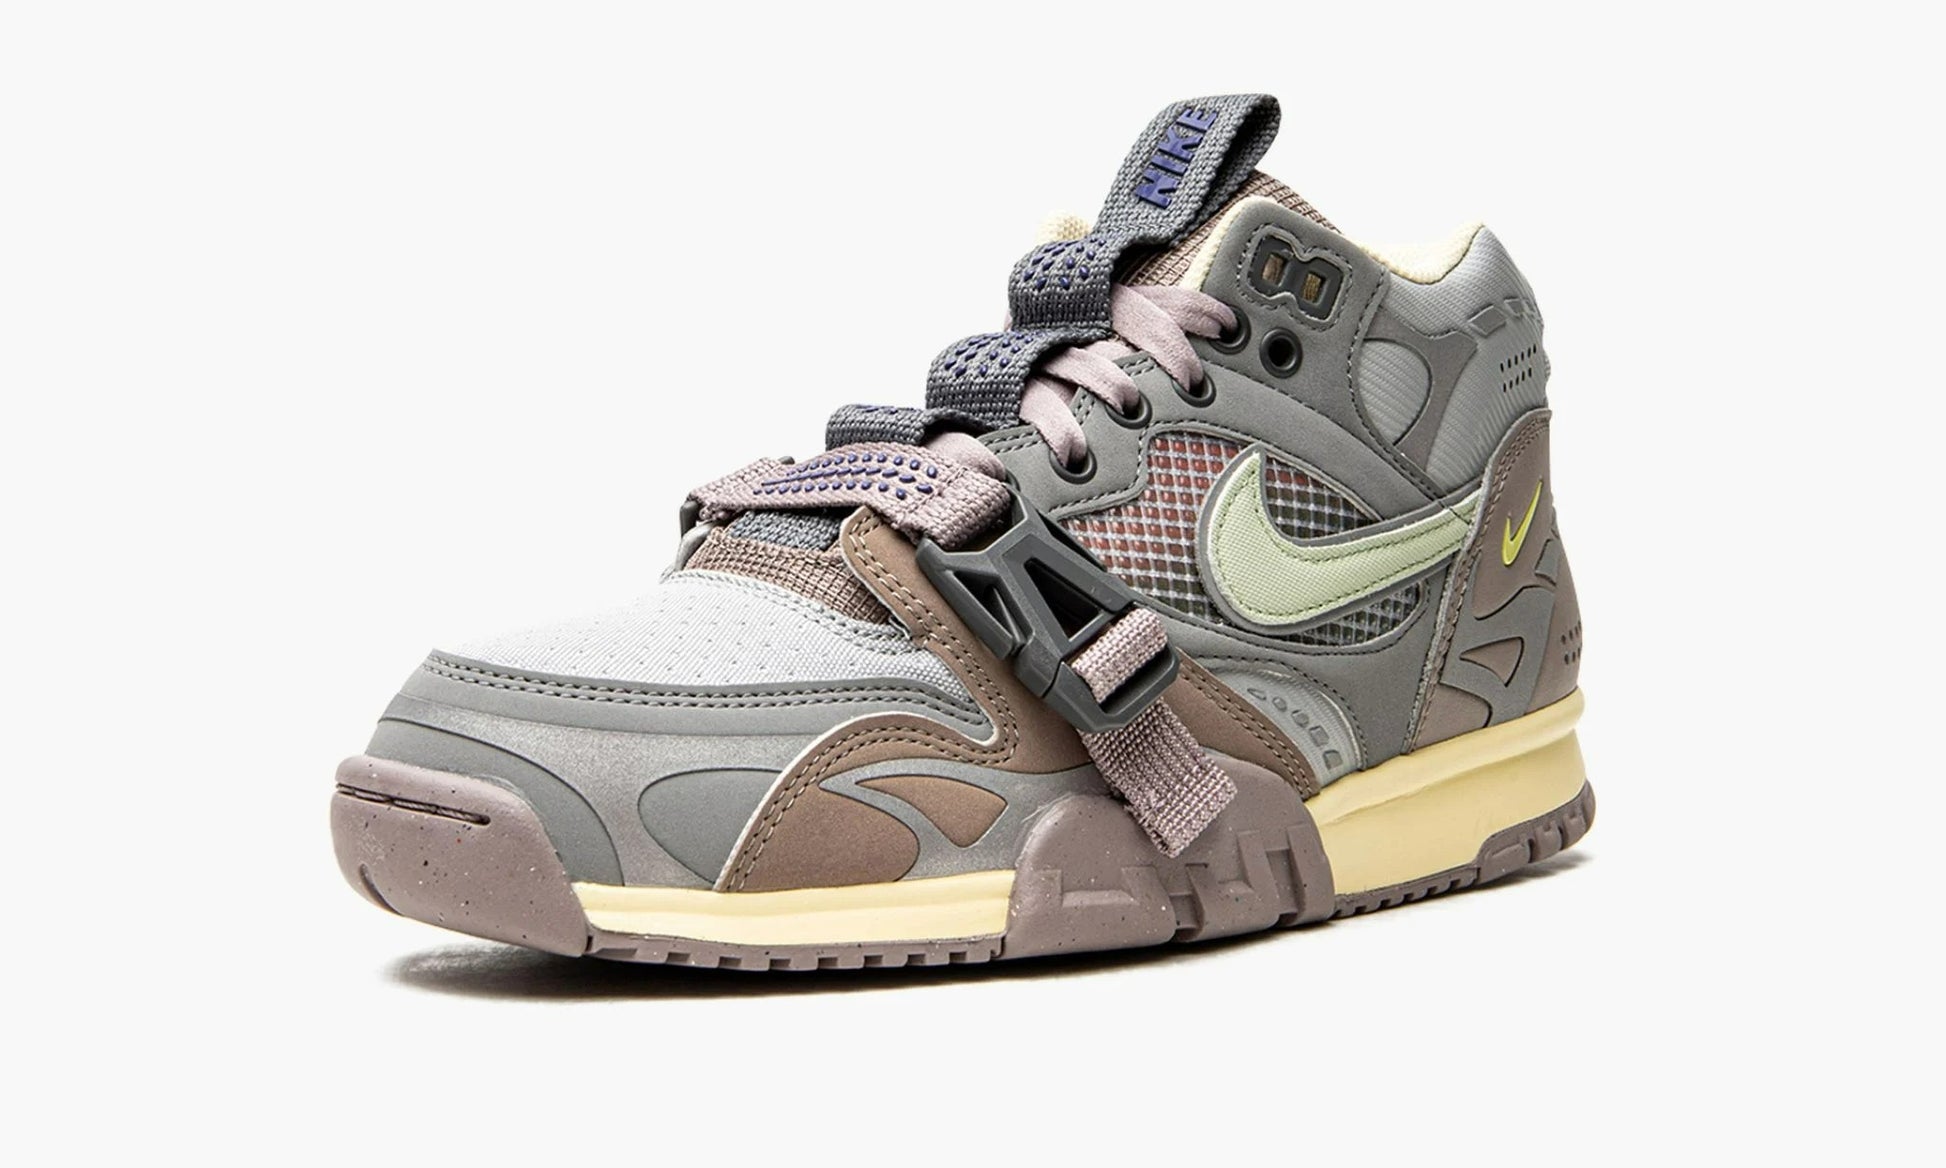 Air Trainer 1 Utility Light Smoke Grey - DH7338 002 | The Sortage